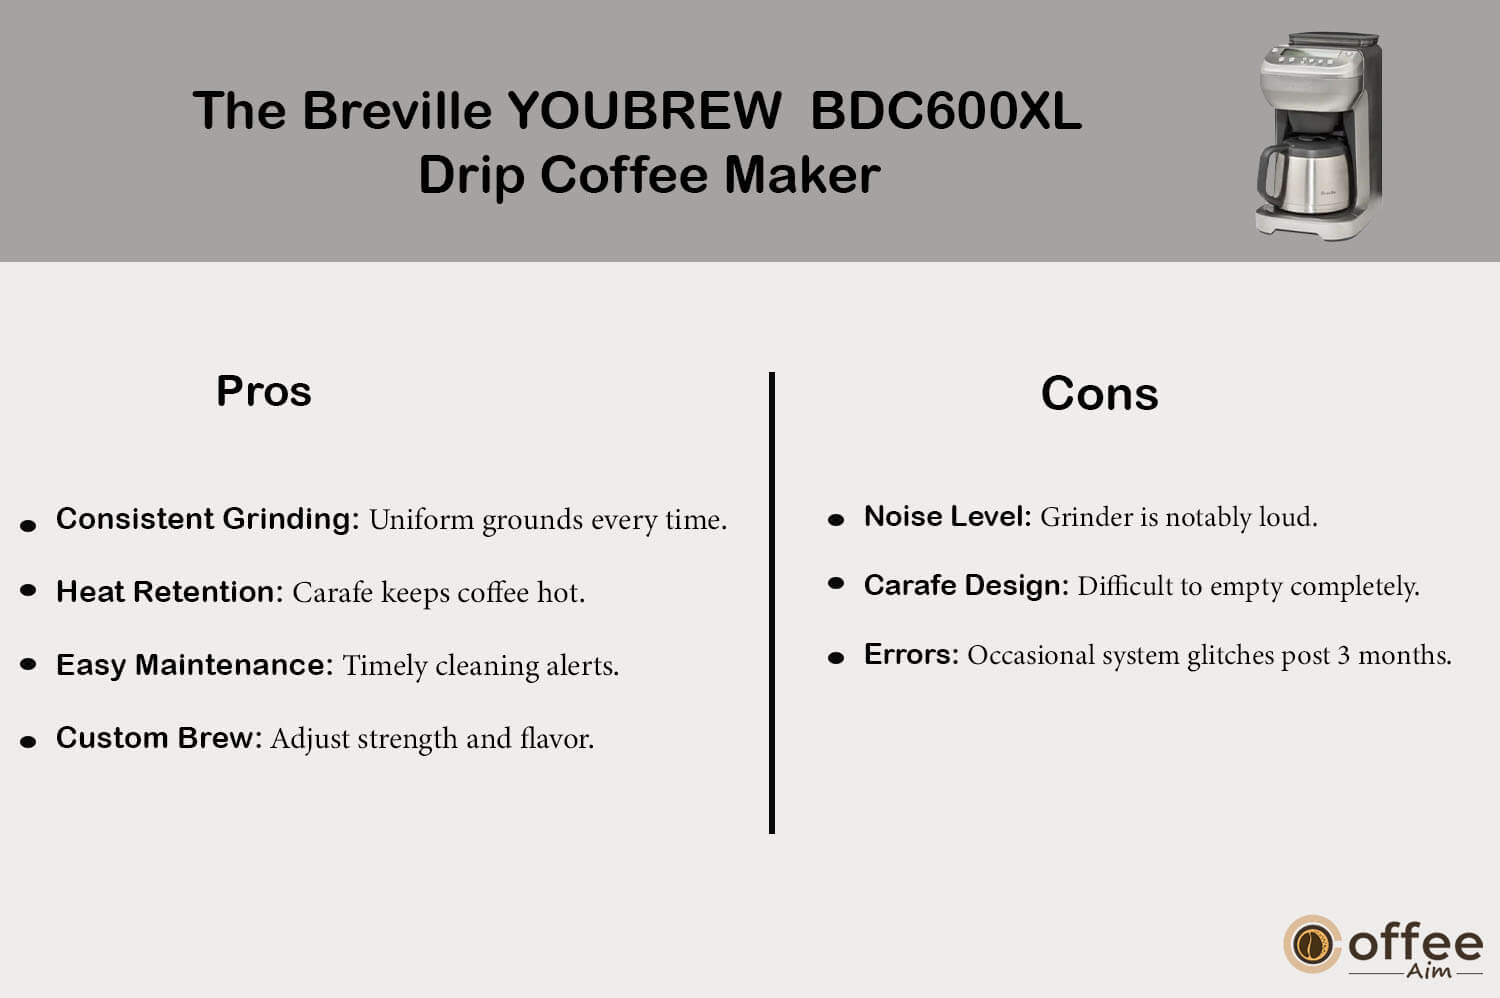 This graphic illustrates the advantages and drawbacks of "The Breville YOUBREW BDC600XL Drip Coffee Maker" as detailed in the article titled "The Breville YOUBREW BDC600XL Drip Coffee Maker Review."